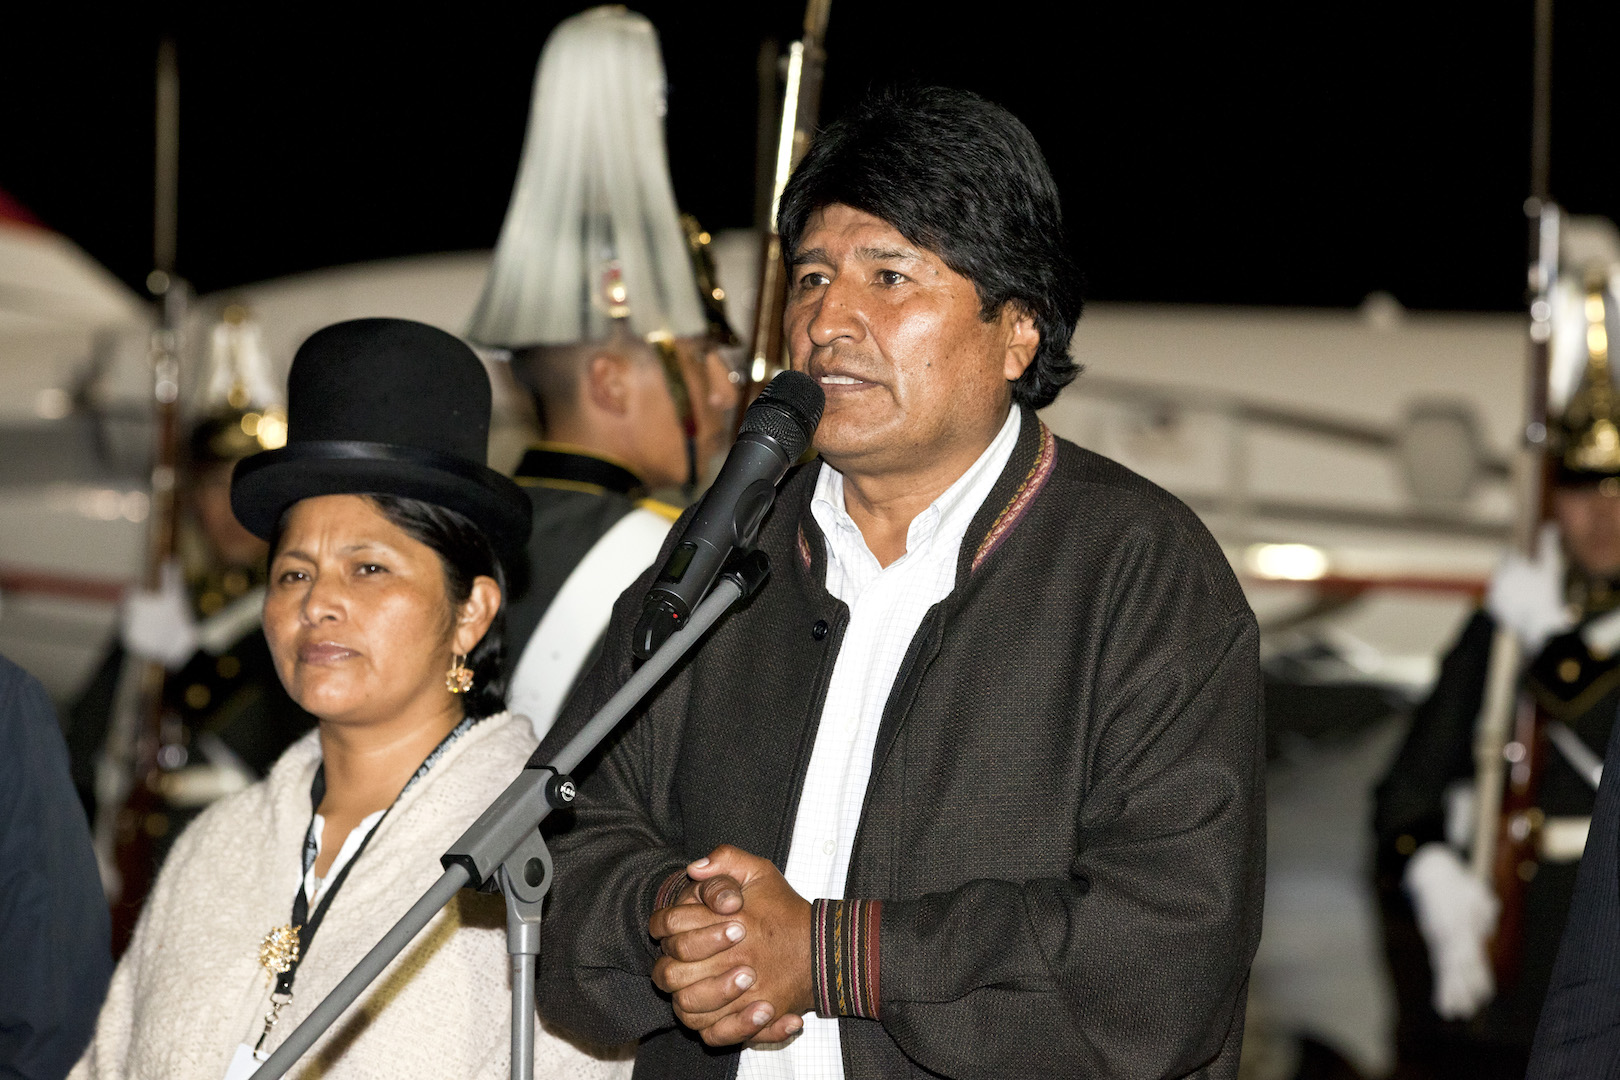 Brazil,Bolivian President Evo Morales takes refuge in Mexico as chaos continues in his home country due to election outcome.